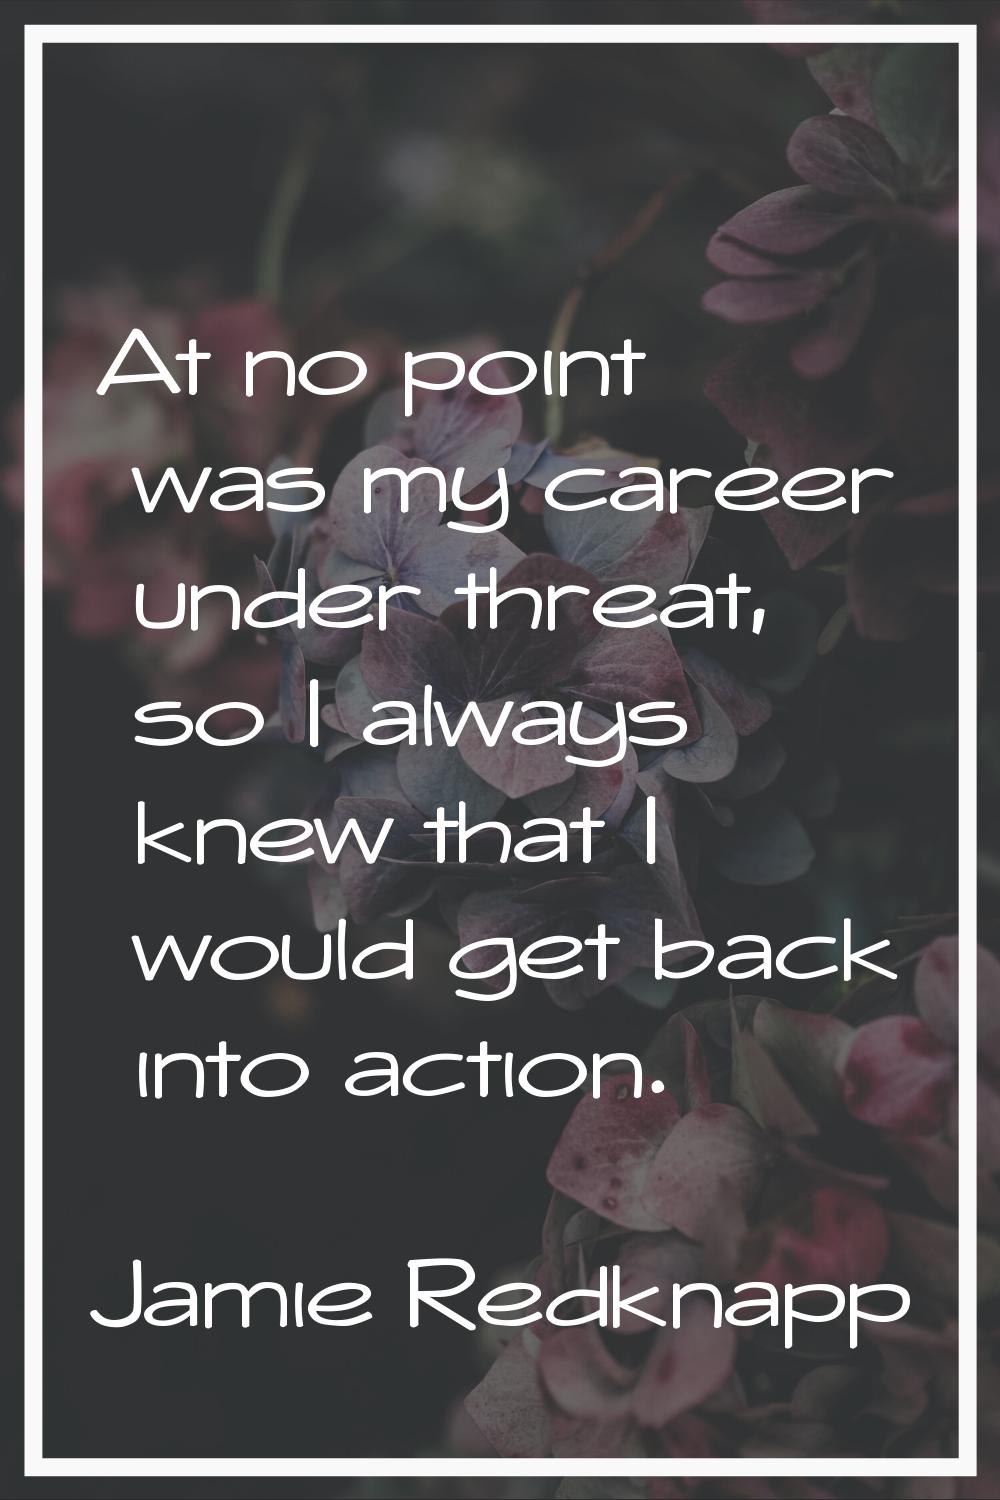 At no point was my career under threat, so I always knew that I would get back into action.